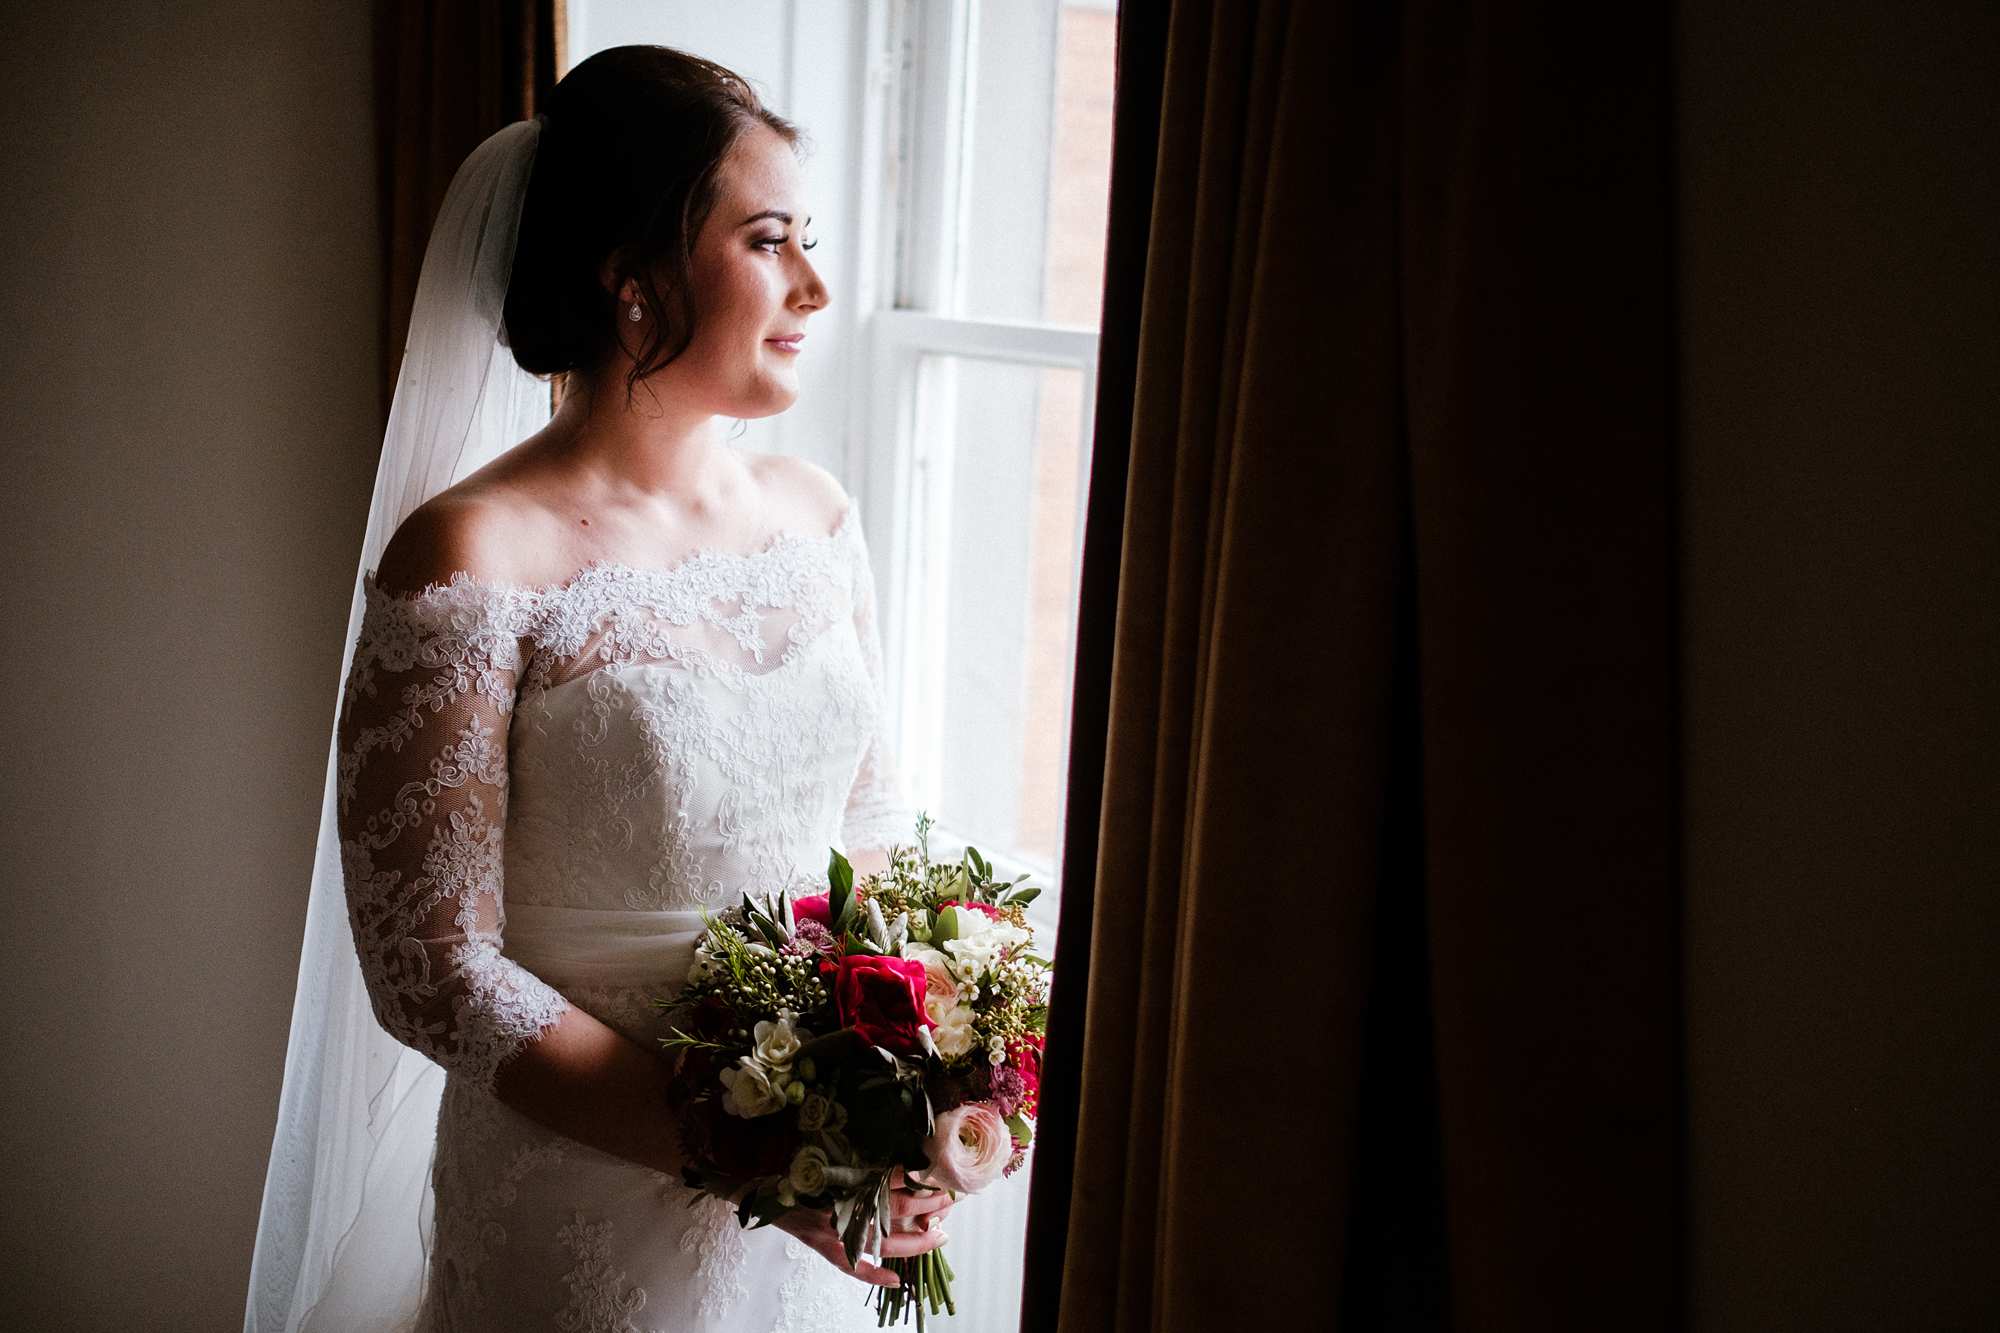 February wedding at Highfield Park in Hampshire